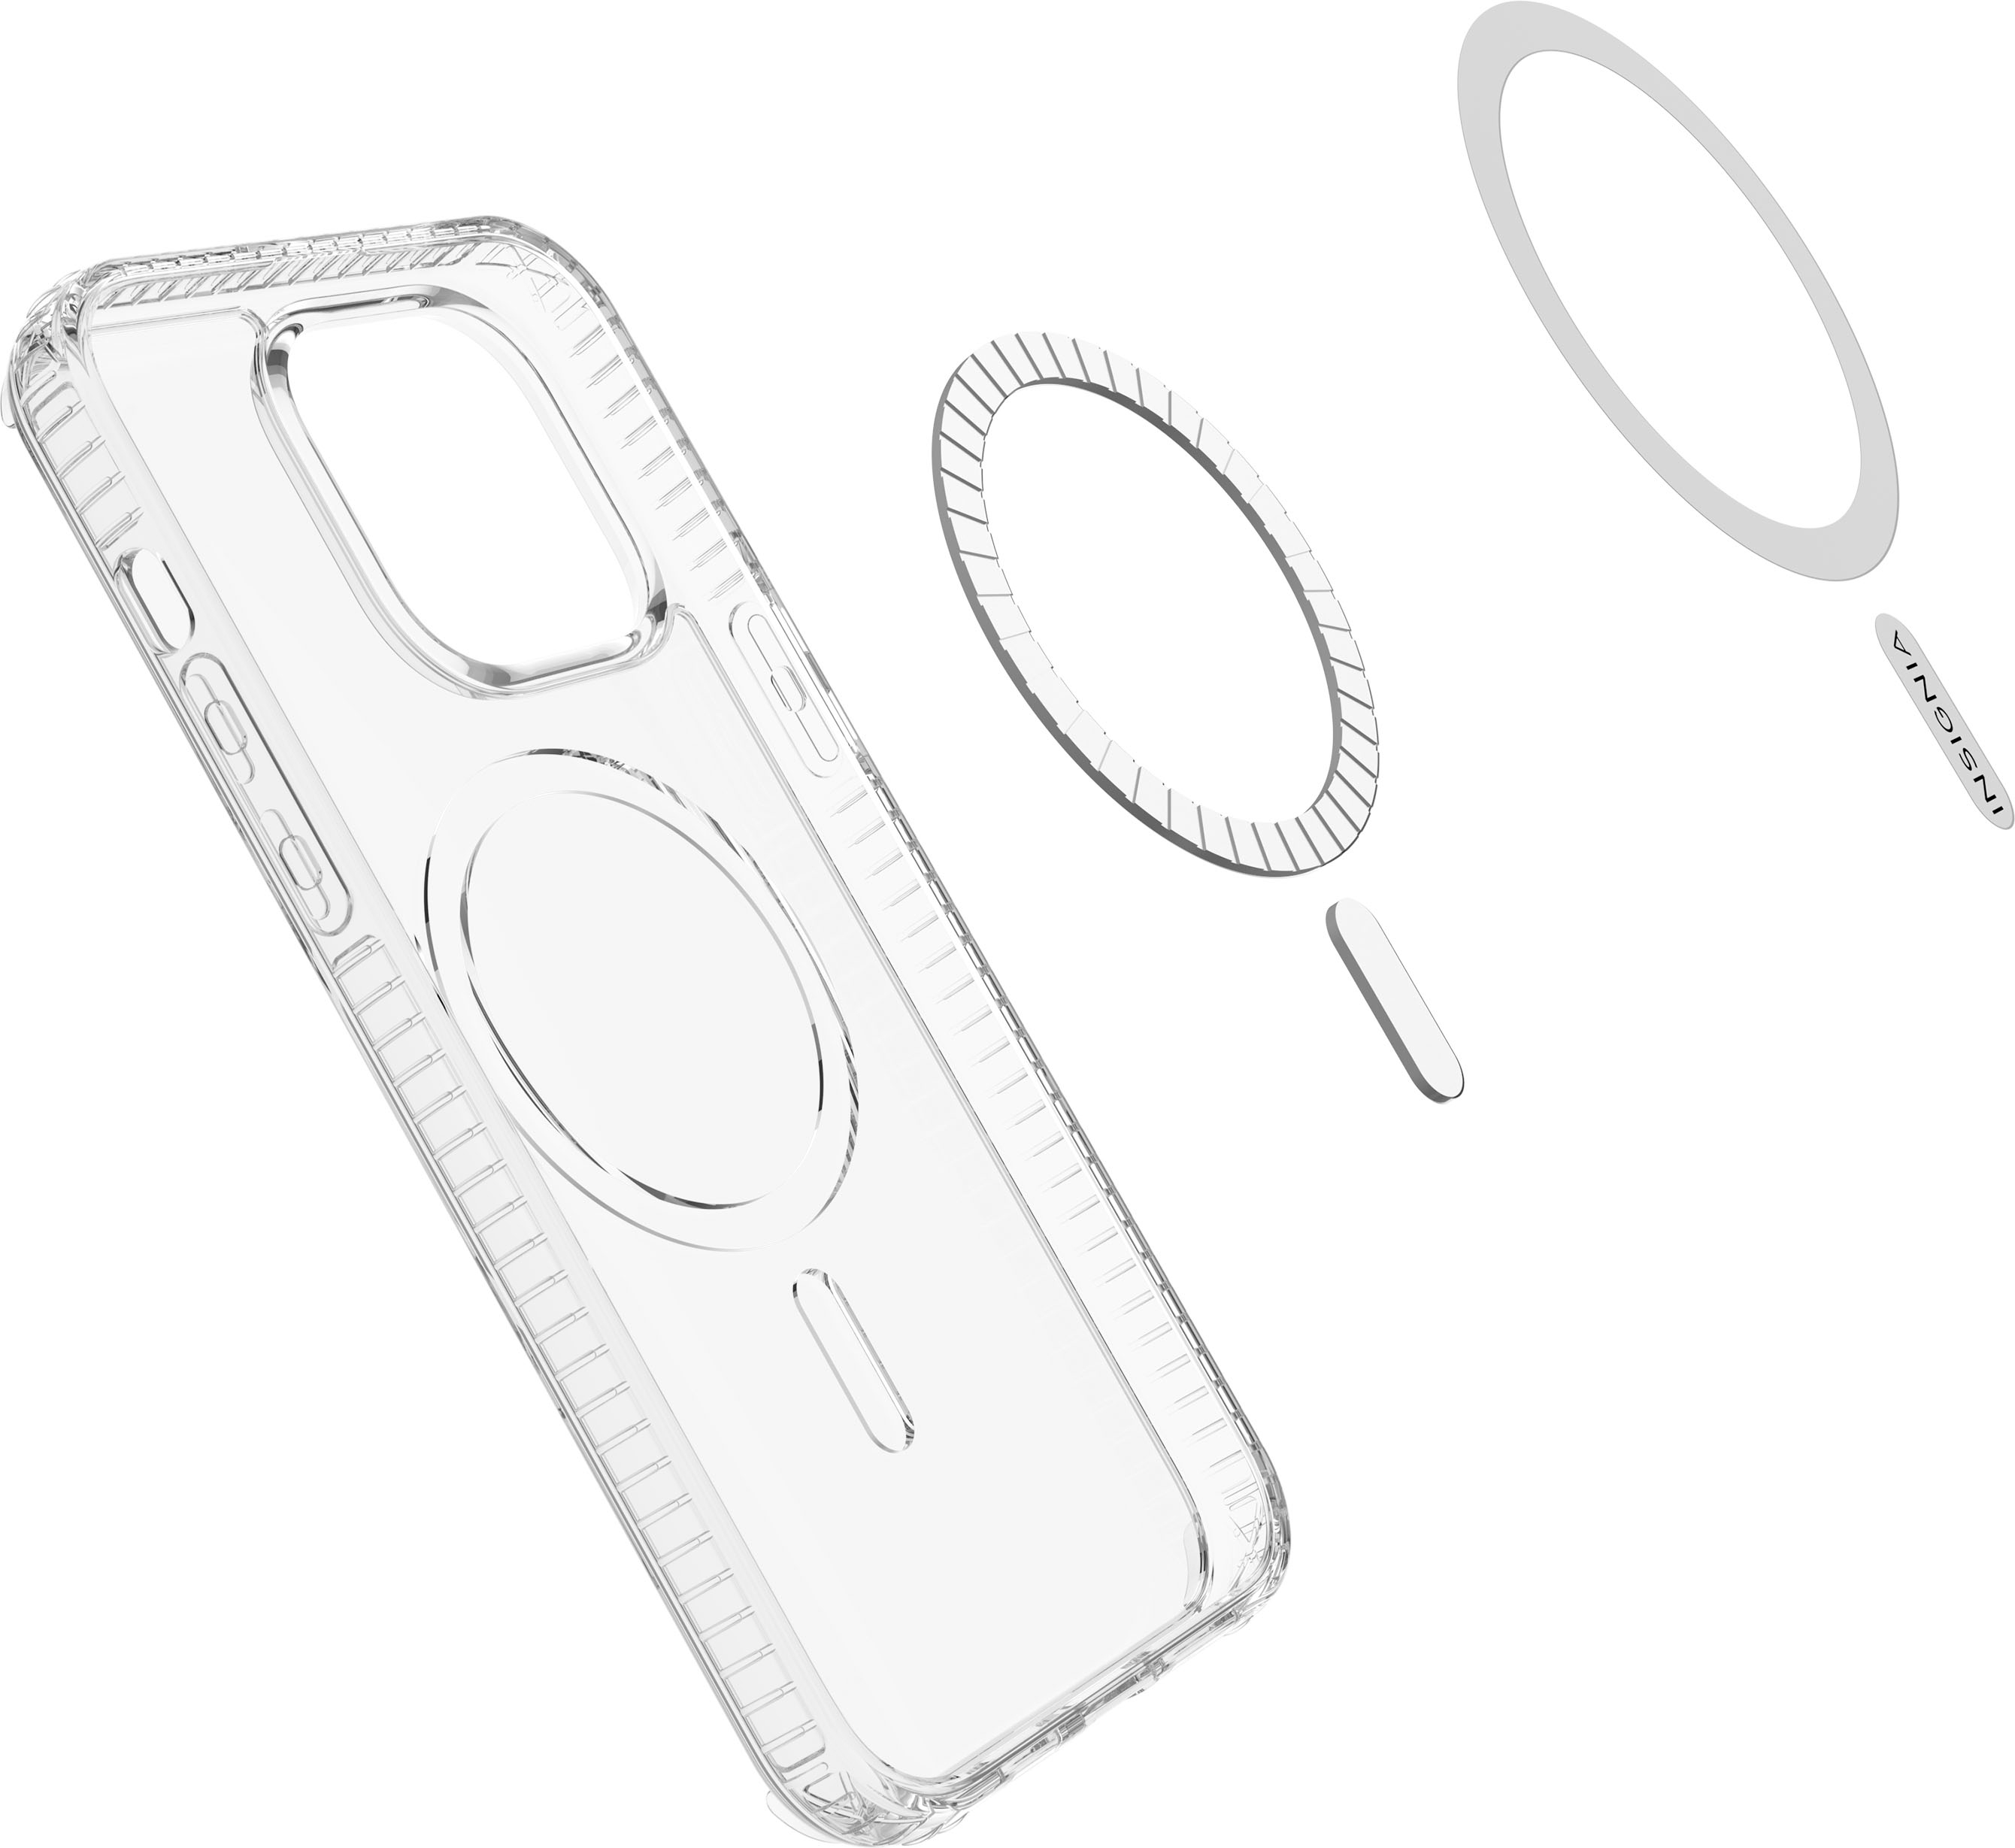 Insignia Clear Hard Shell Case for Apple iPhone 11 Pro Max